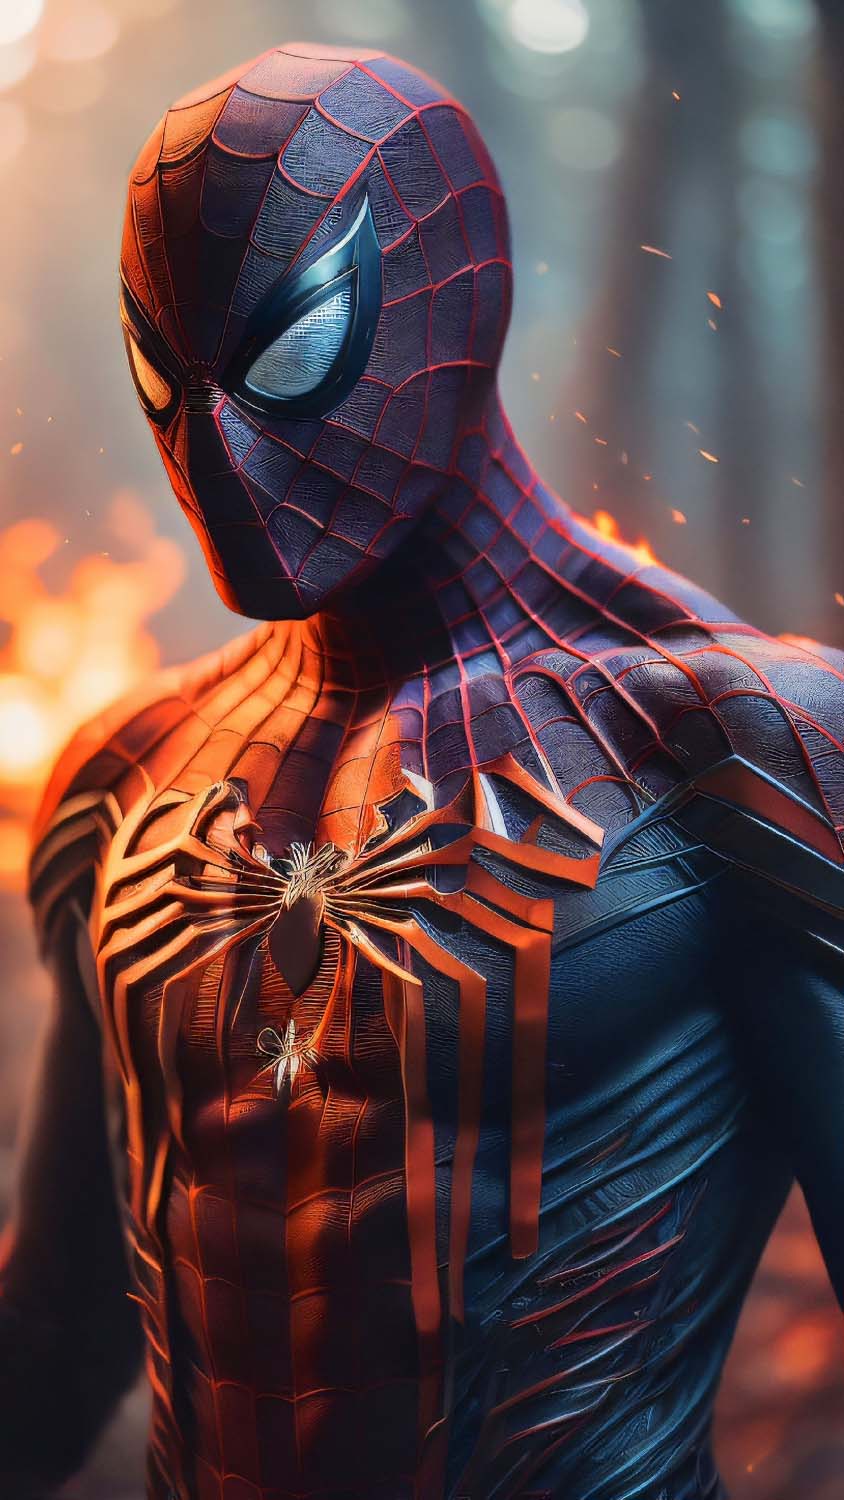 Download wallpaper 950x1534 spider-man ps5, video game, black suit, 2020,  iphone, 950x1534 hd background, 26581